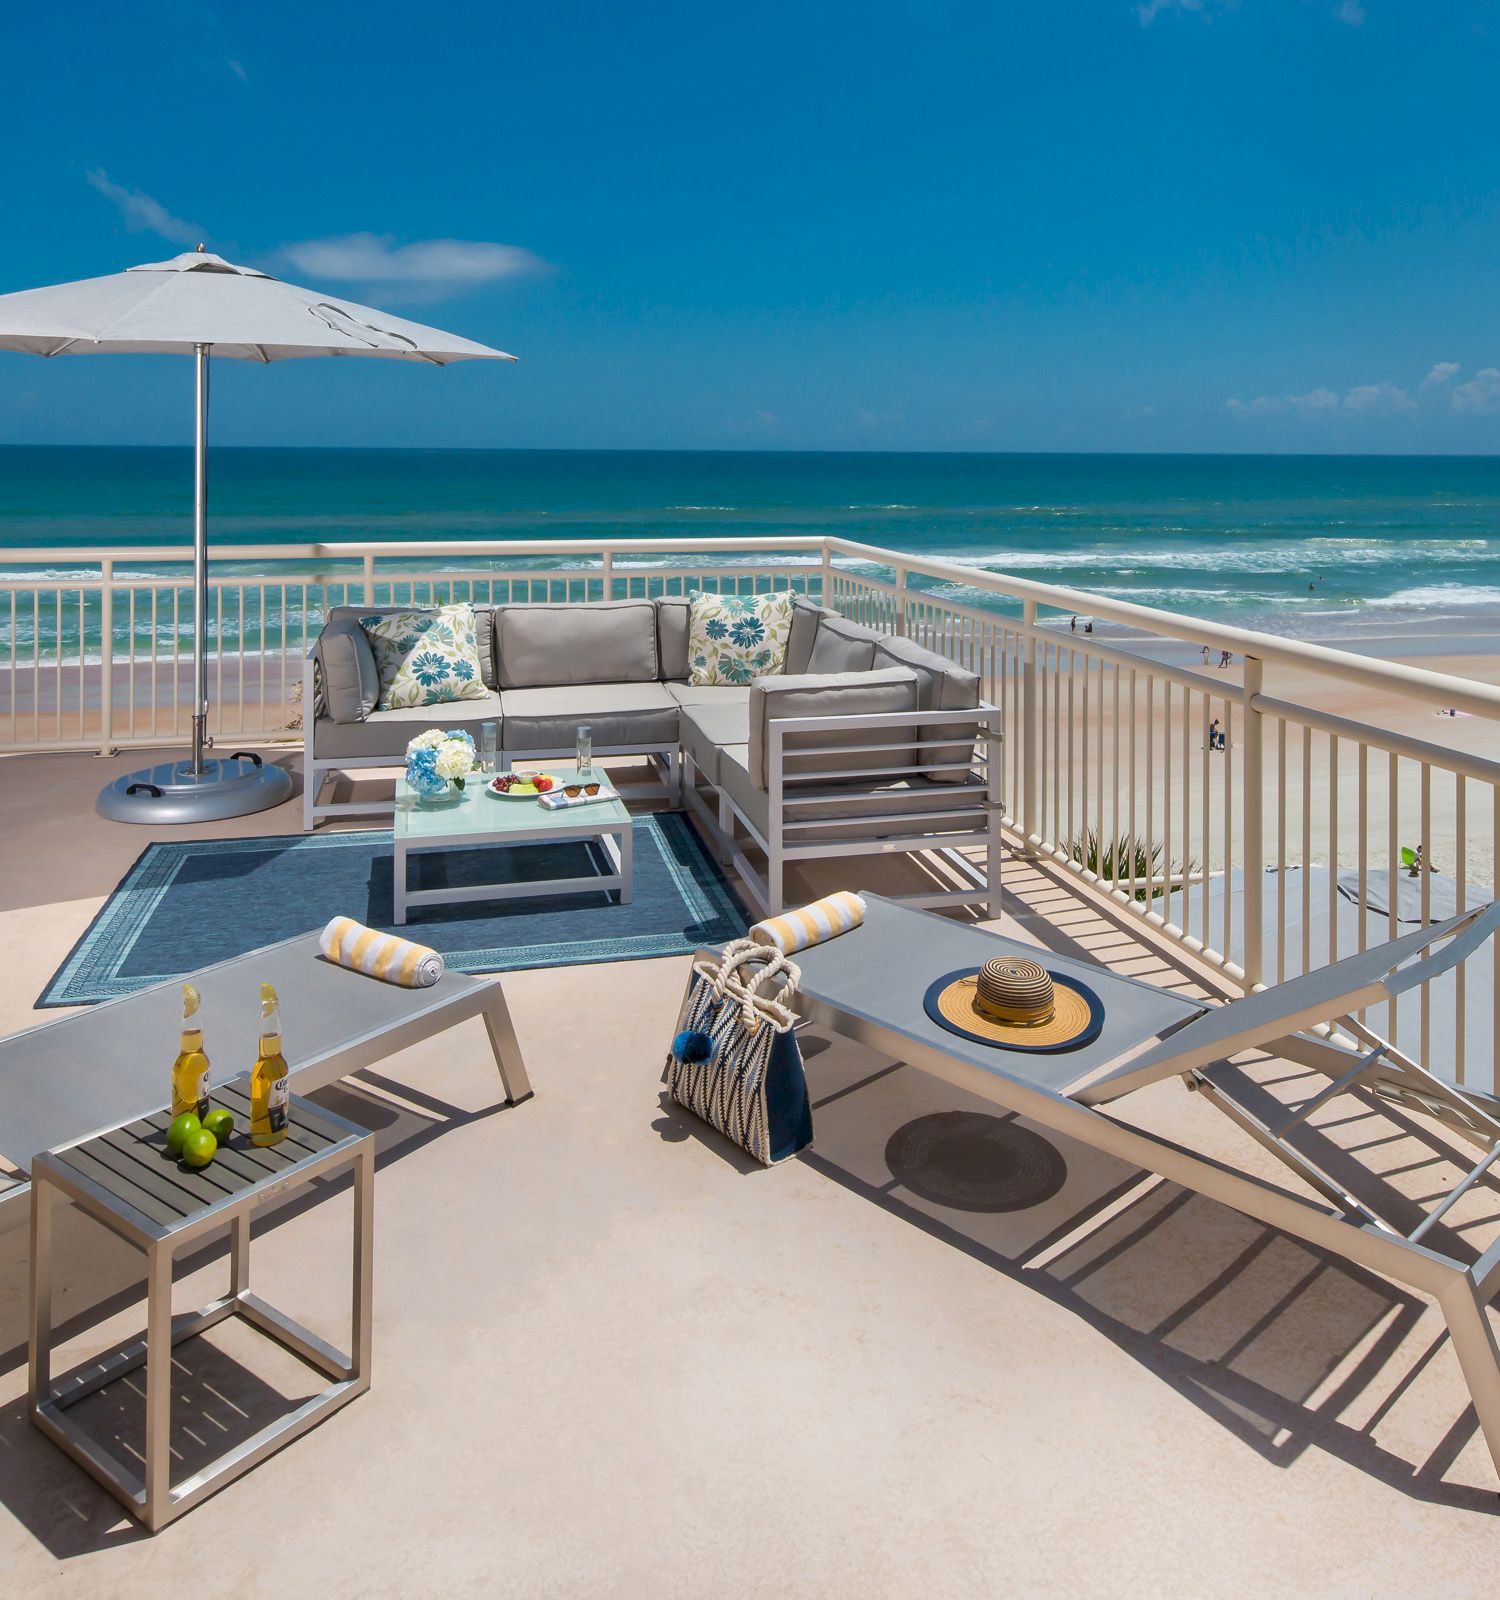 Oceanfront balcony with furniture, sun umbrella, and beach view.